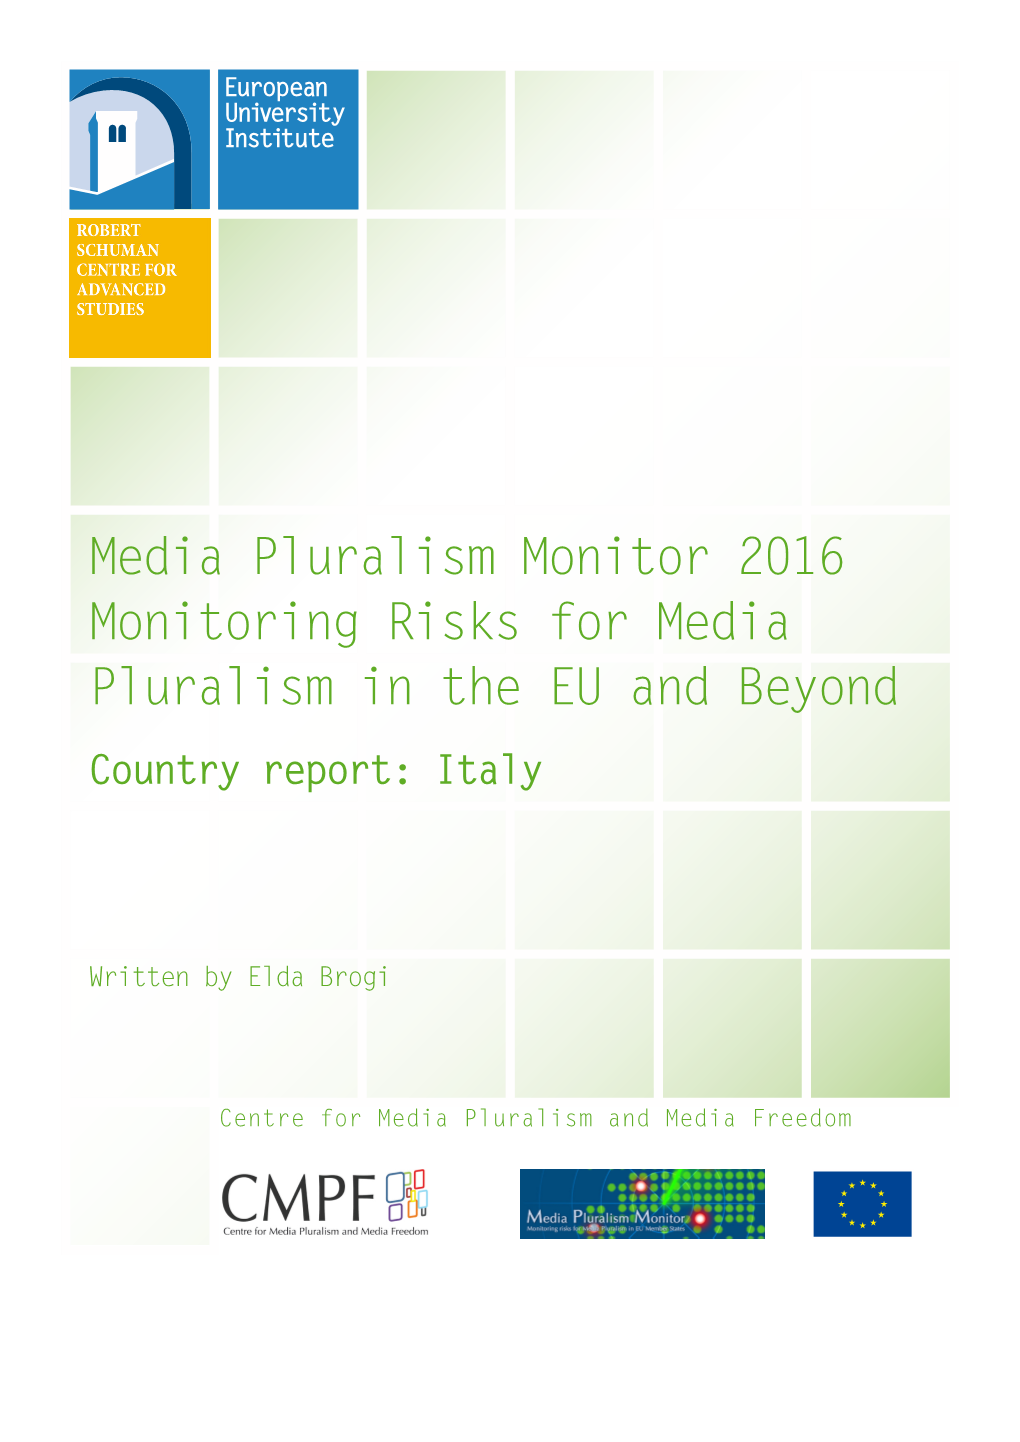 Media Pluralism Monitor 2016 Monitoring Risks for Media Pluralism in the EU and Beyond Country Report: Italy